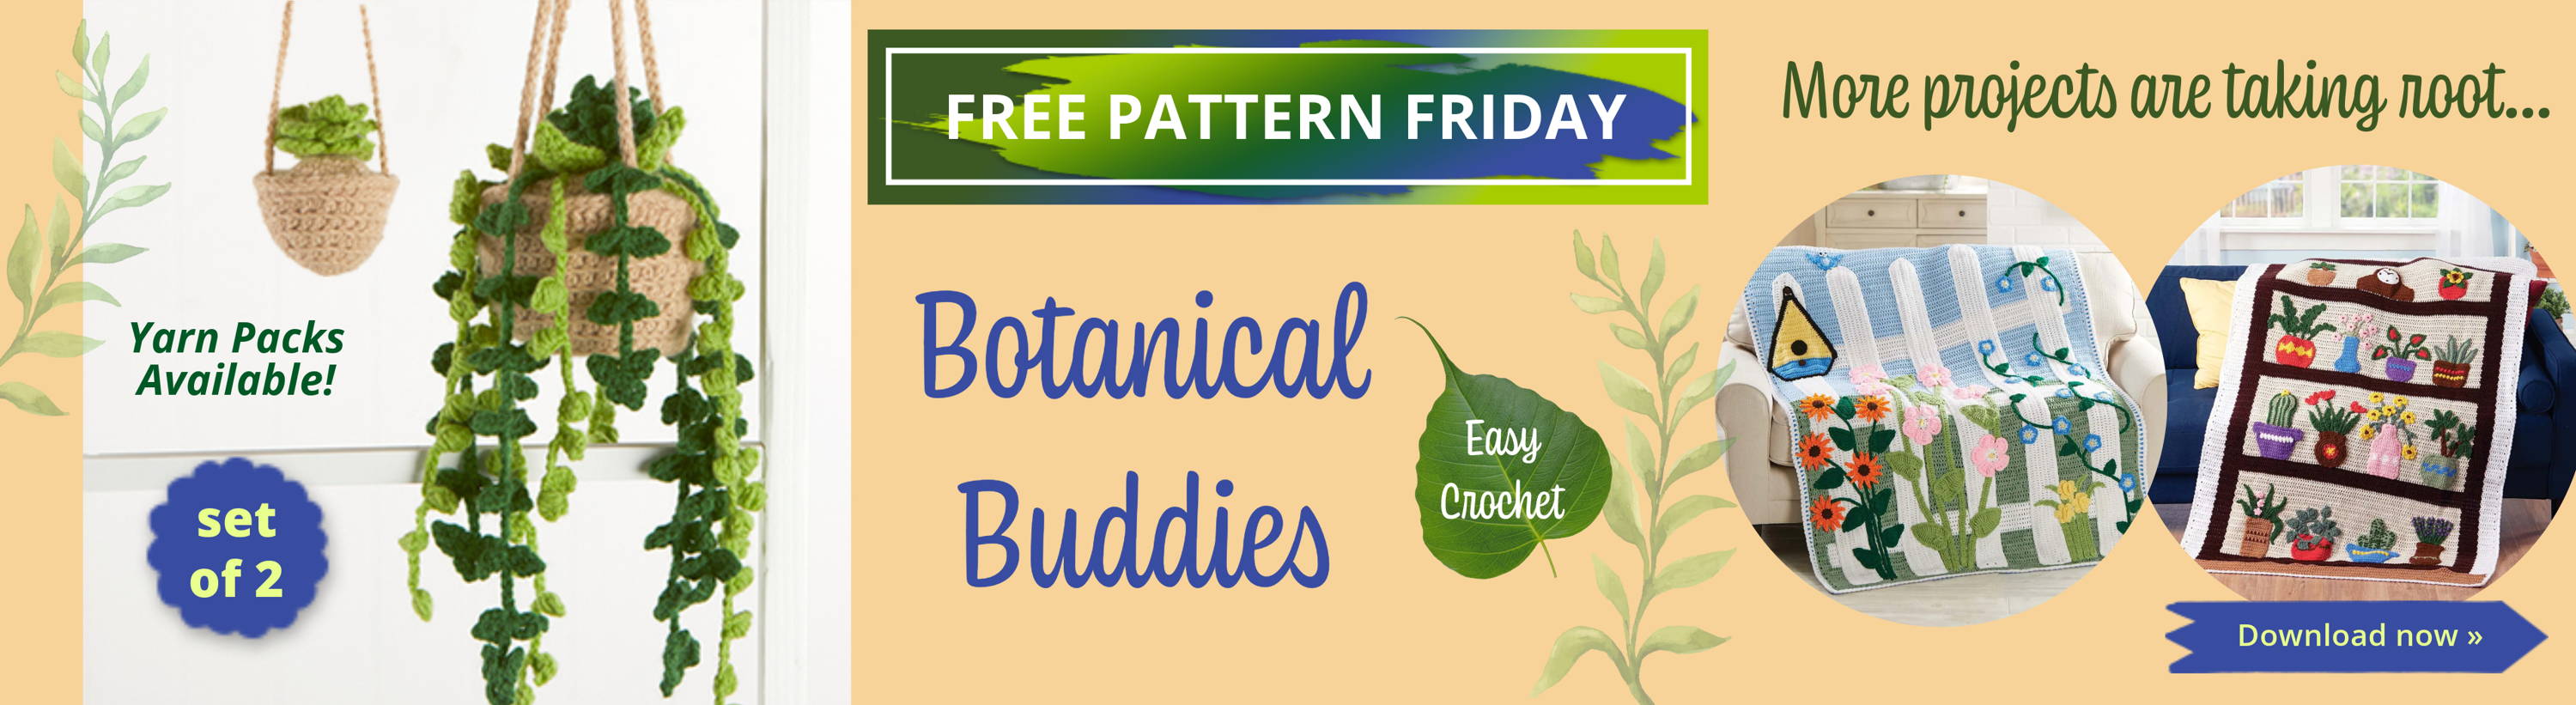 Free Pattern Friday! Botanical Buddies (set of 2) Easy Crochet. Plus, More projects are taking root. Images: crochet plant projects.